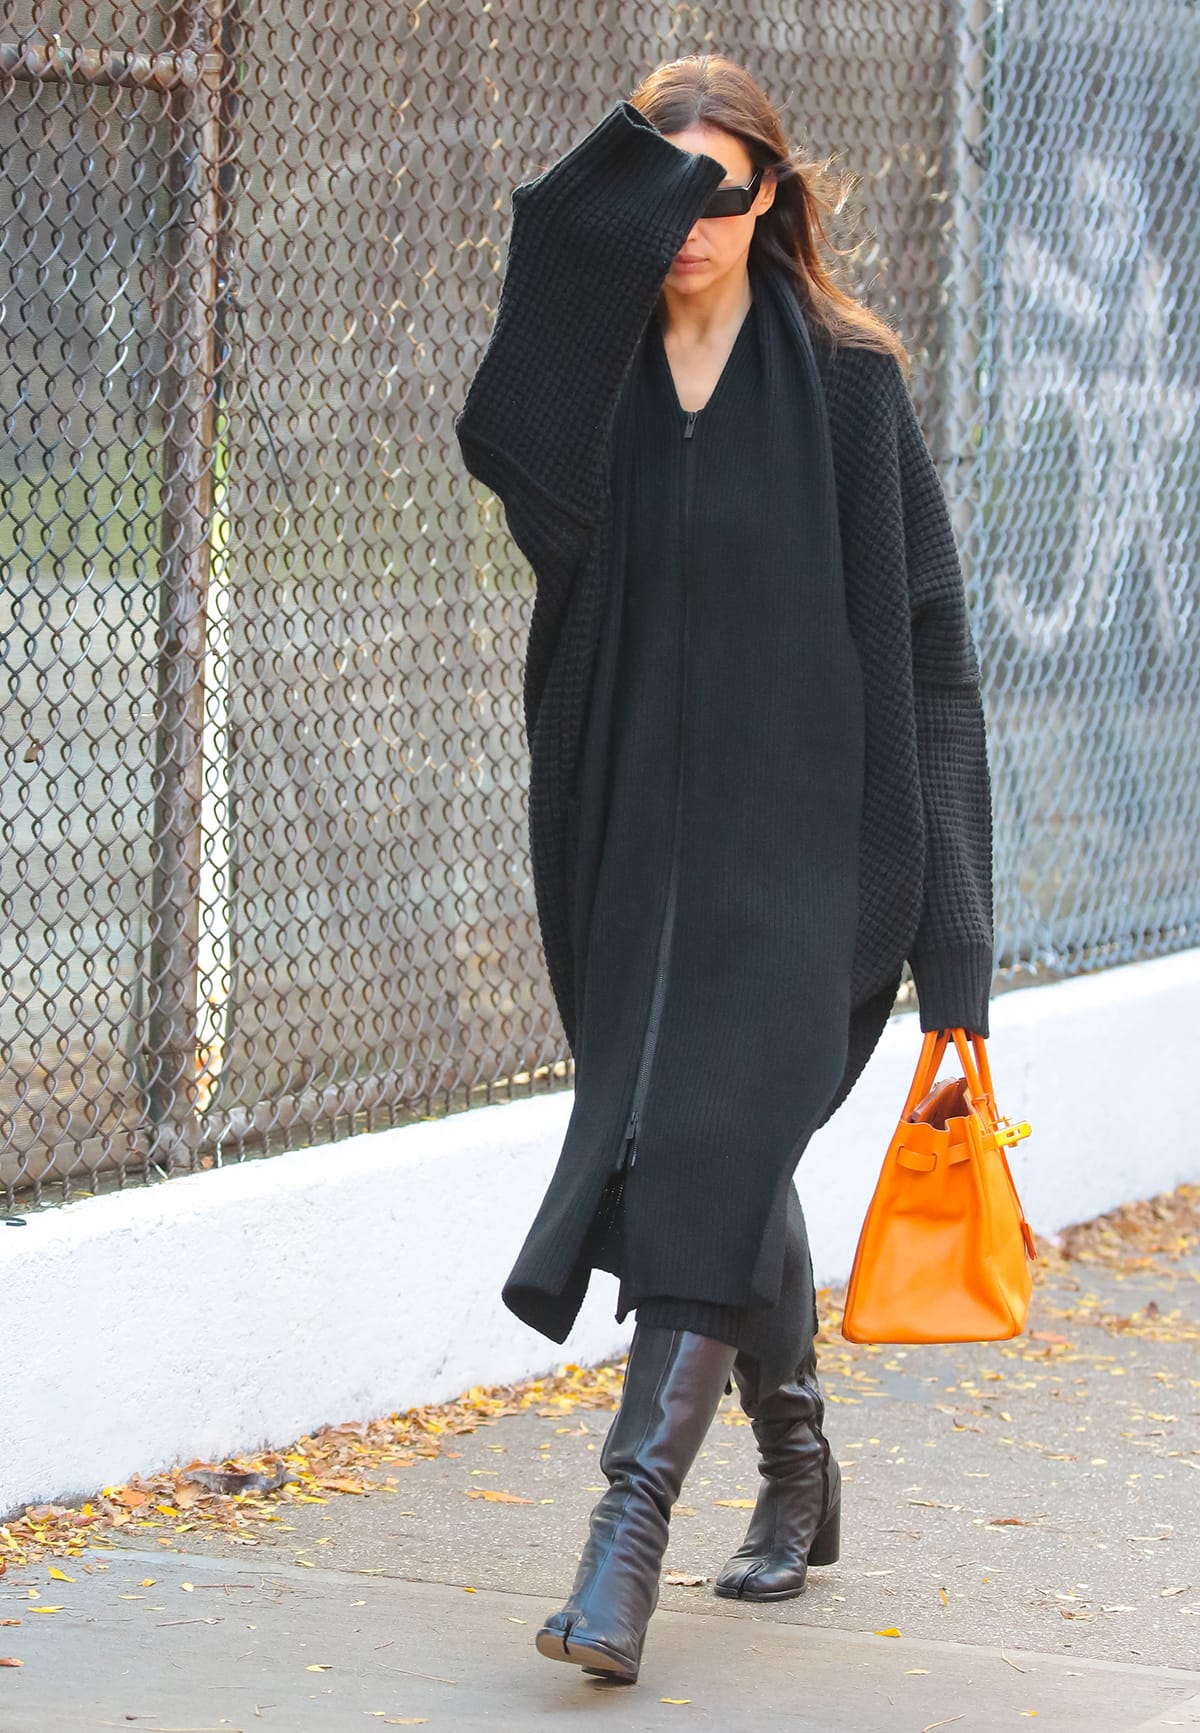 Irina Shayk opts for a monochromatic fall outfit composed of a thick black jacket, a black knit midi dress, and black knee-high boots while out in New York City on November 1, 2023